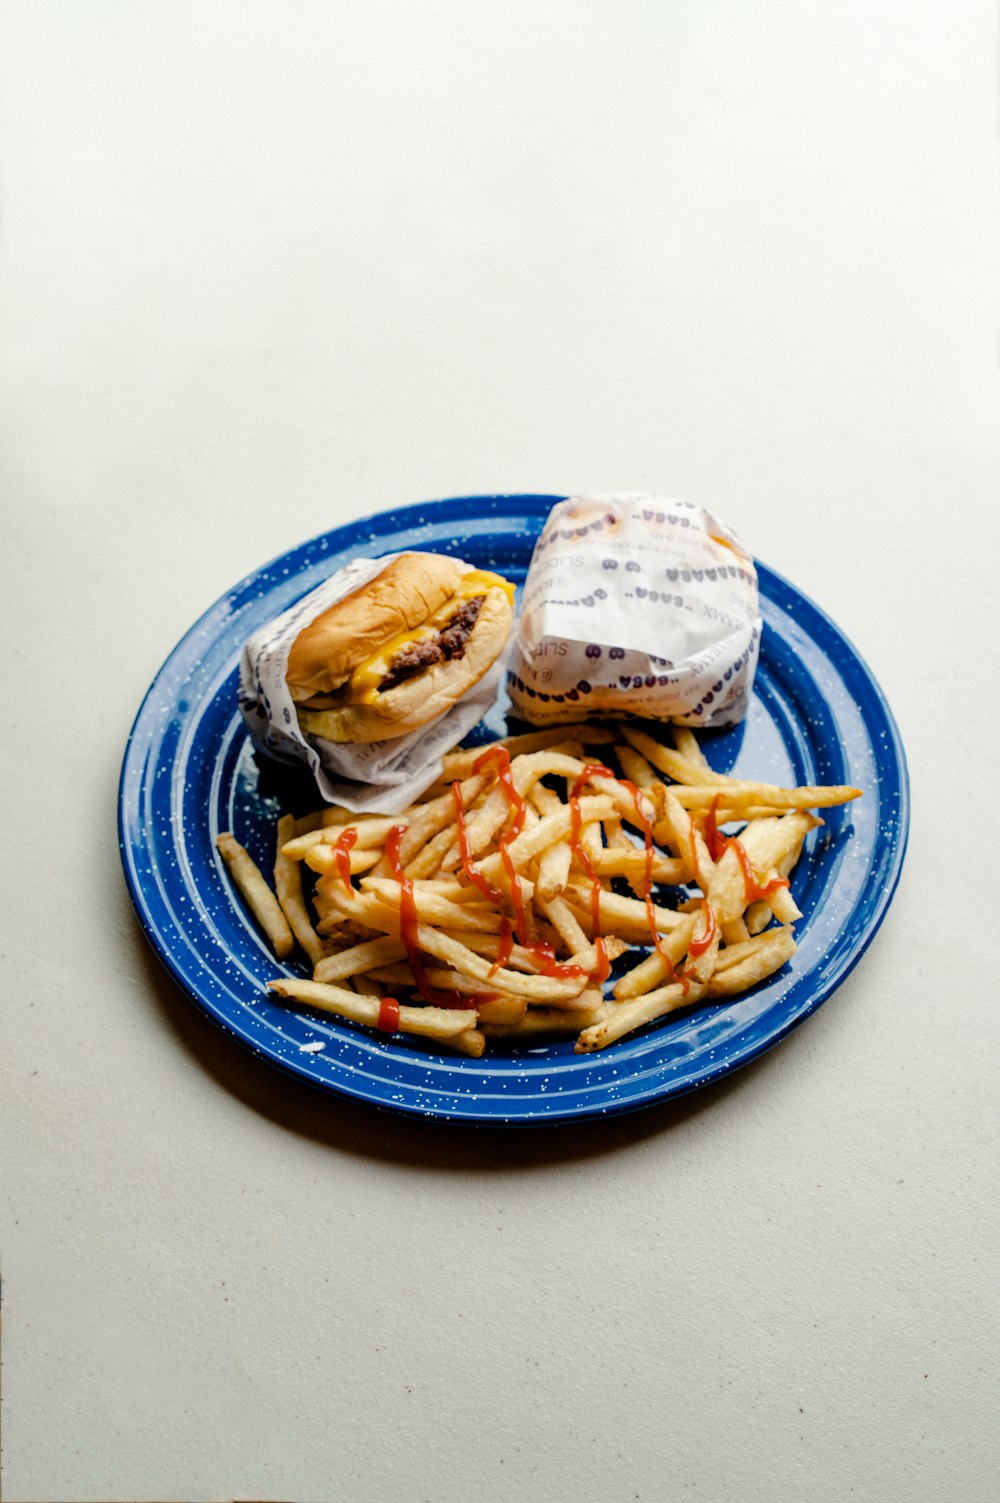 burger and fries on blue and white ceramic plate